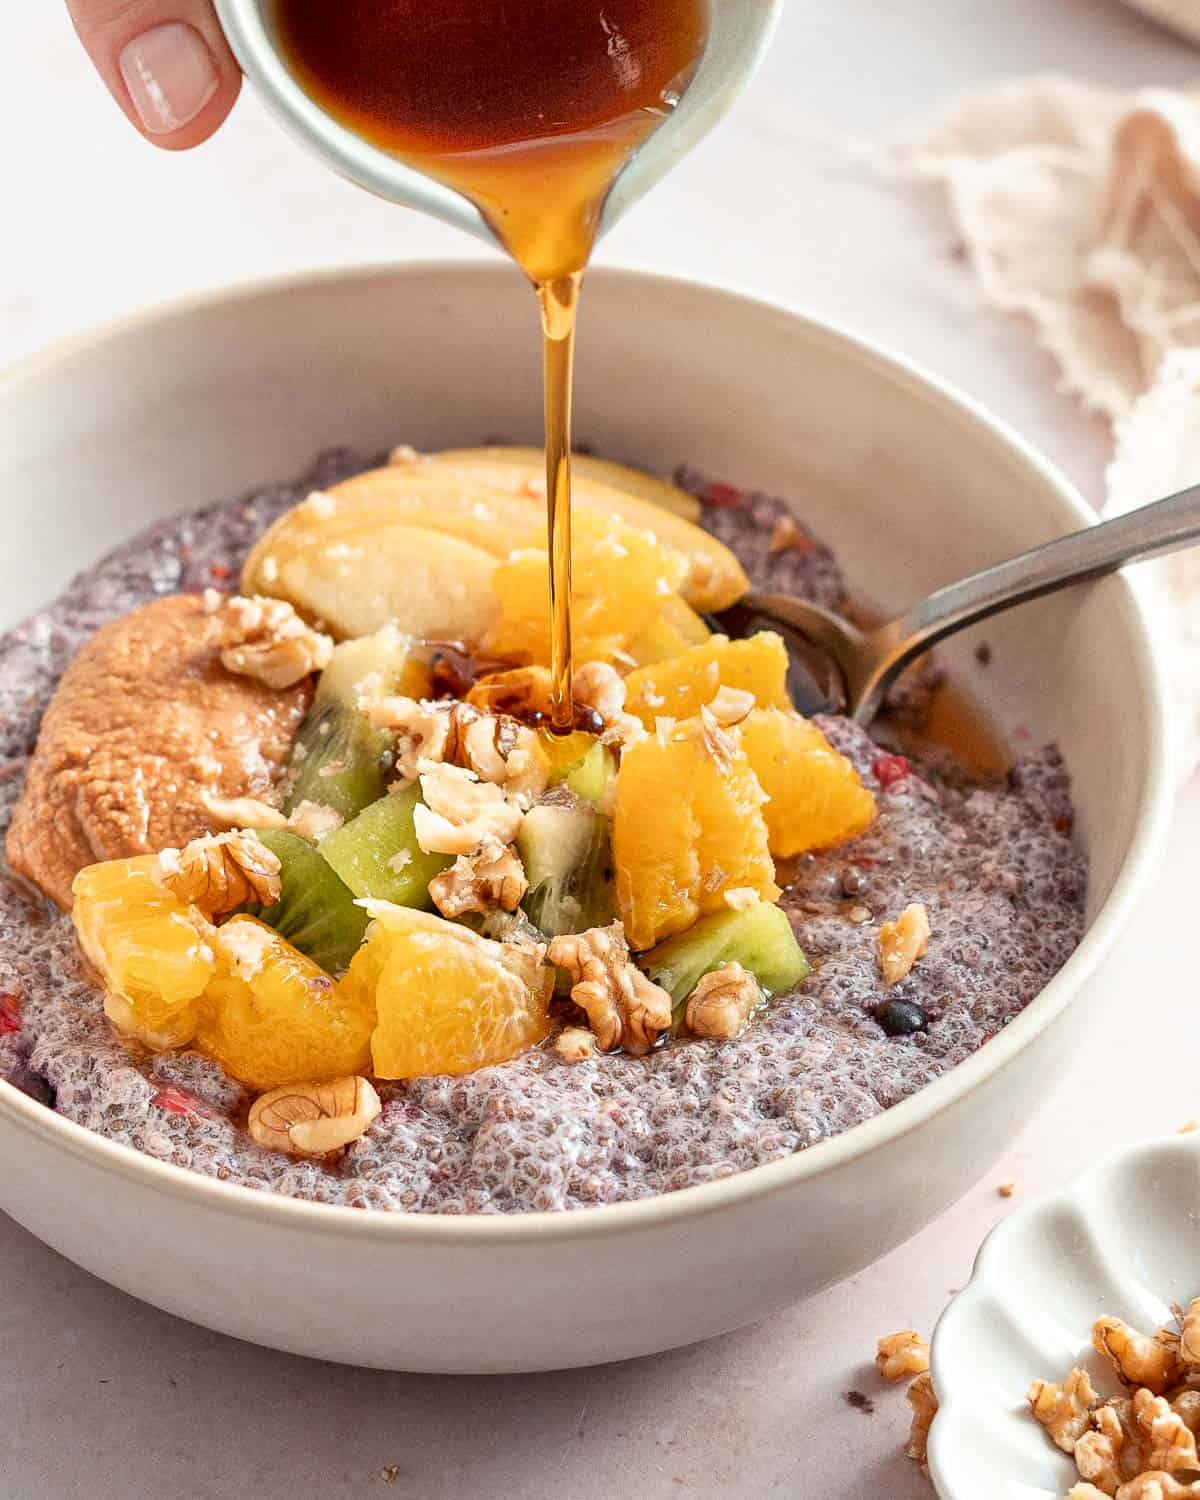 breakfast bowl of chia pudding topped with fresh fruit, walnuts and maple syrup.